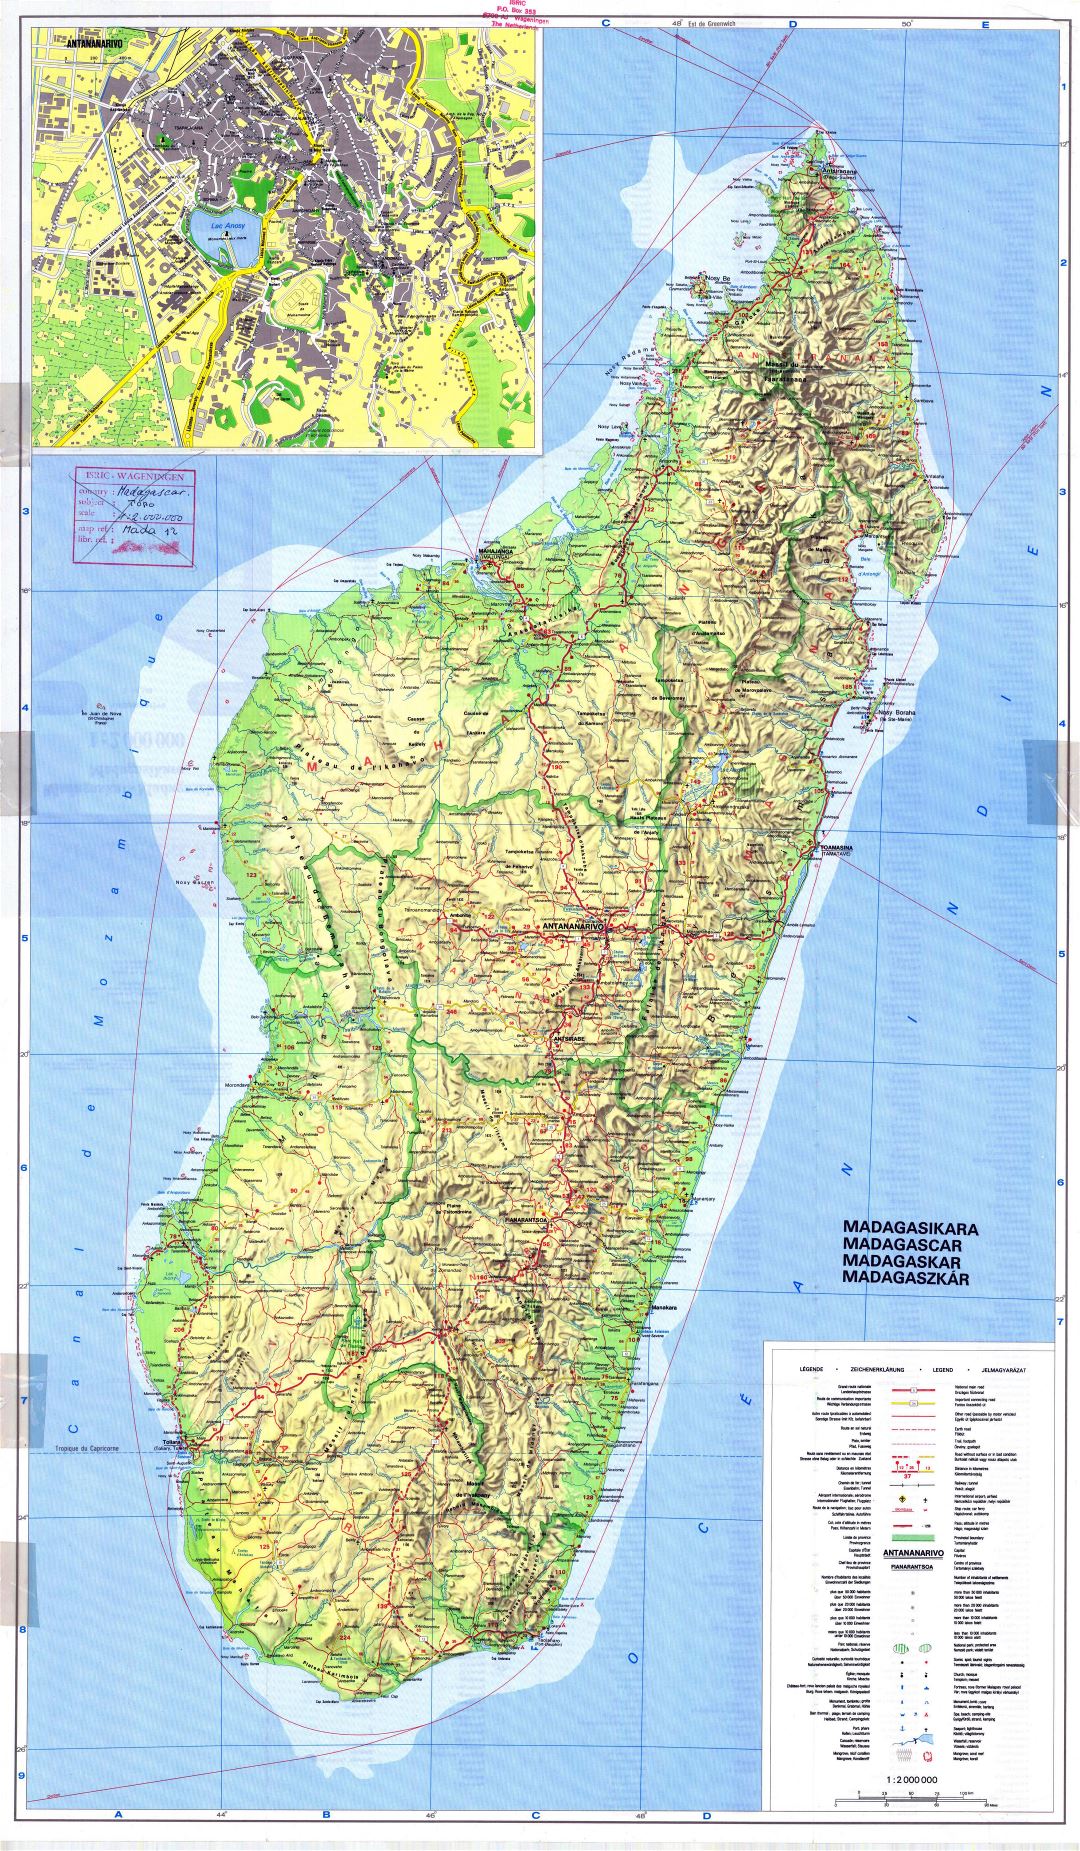 Large scale topographic map of Madagascar with all roads, cities, sea ports, airports and other marks